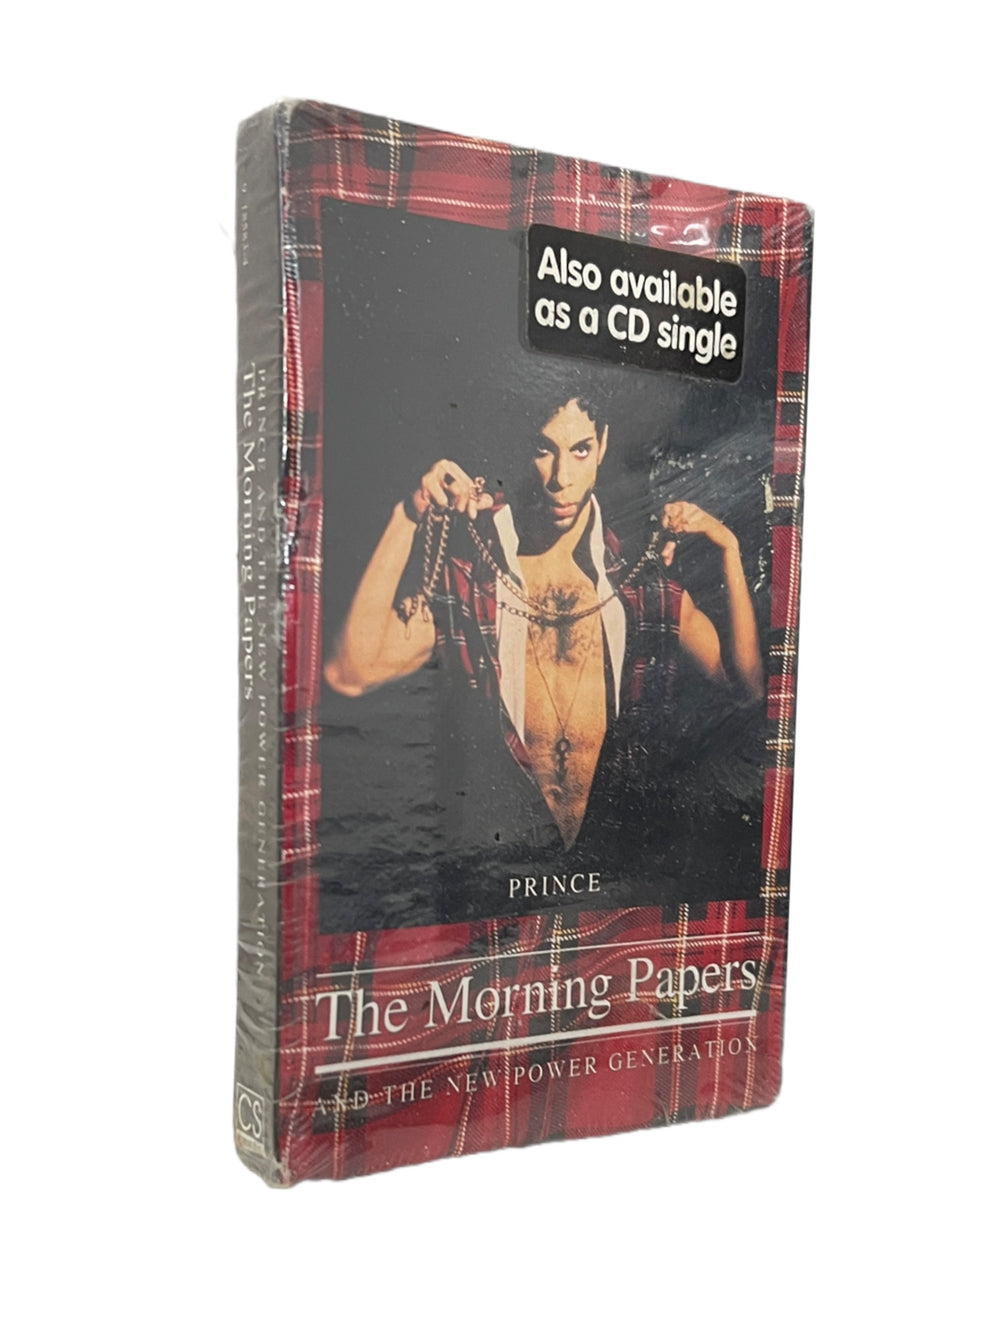 Prince – & The New Power Generation – The Morning Papers Cassette Single US Preloved: 1993